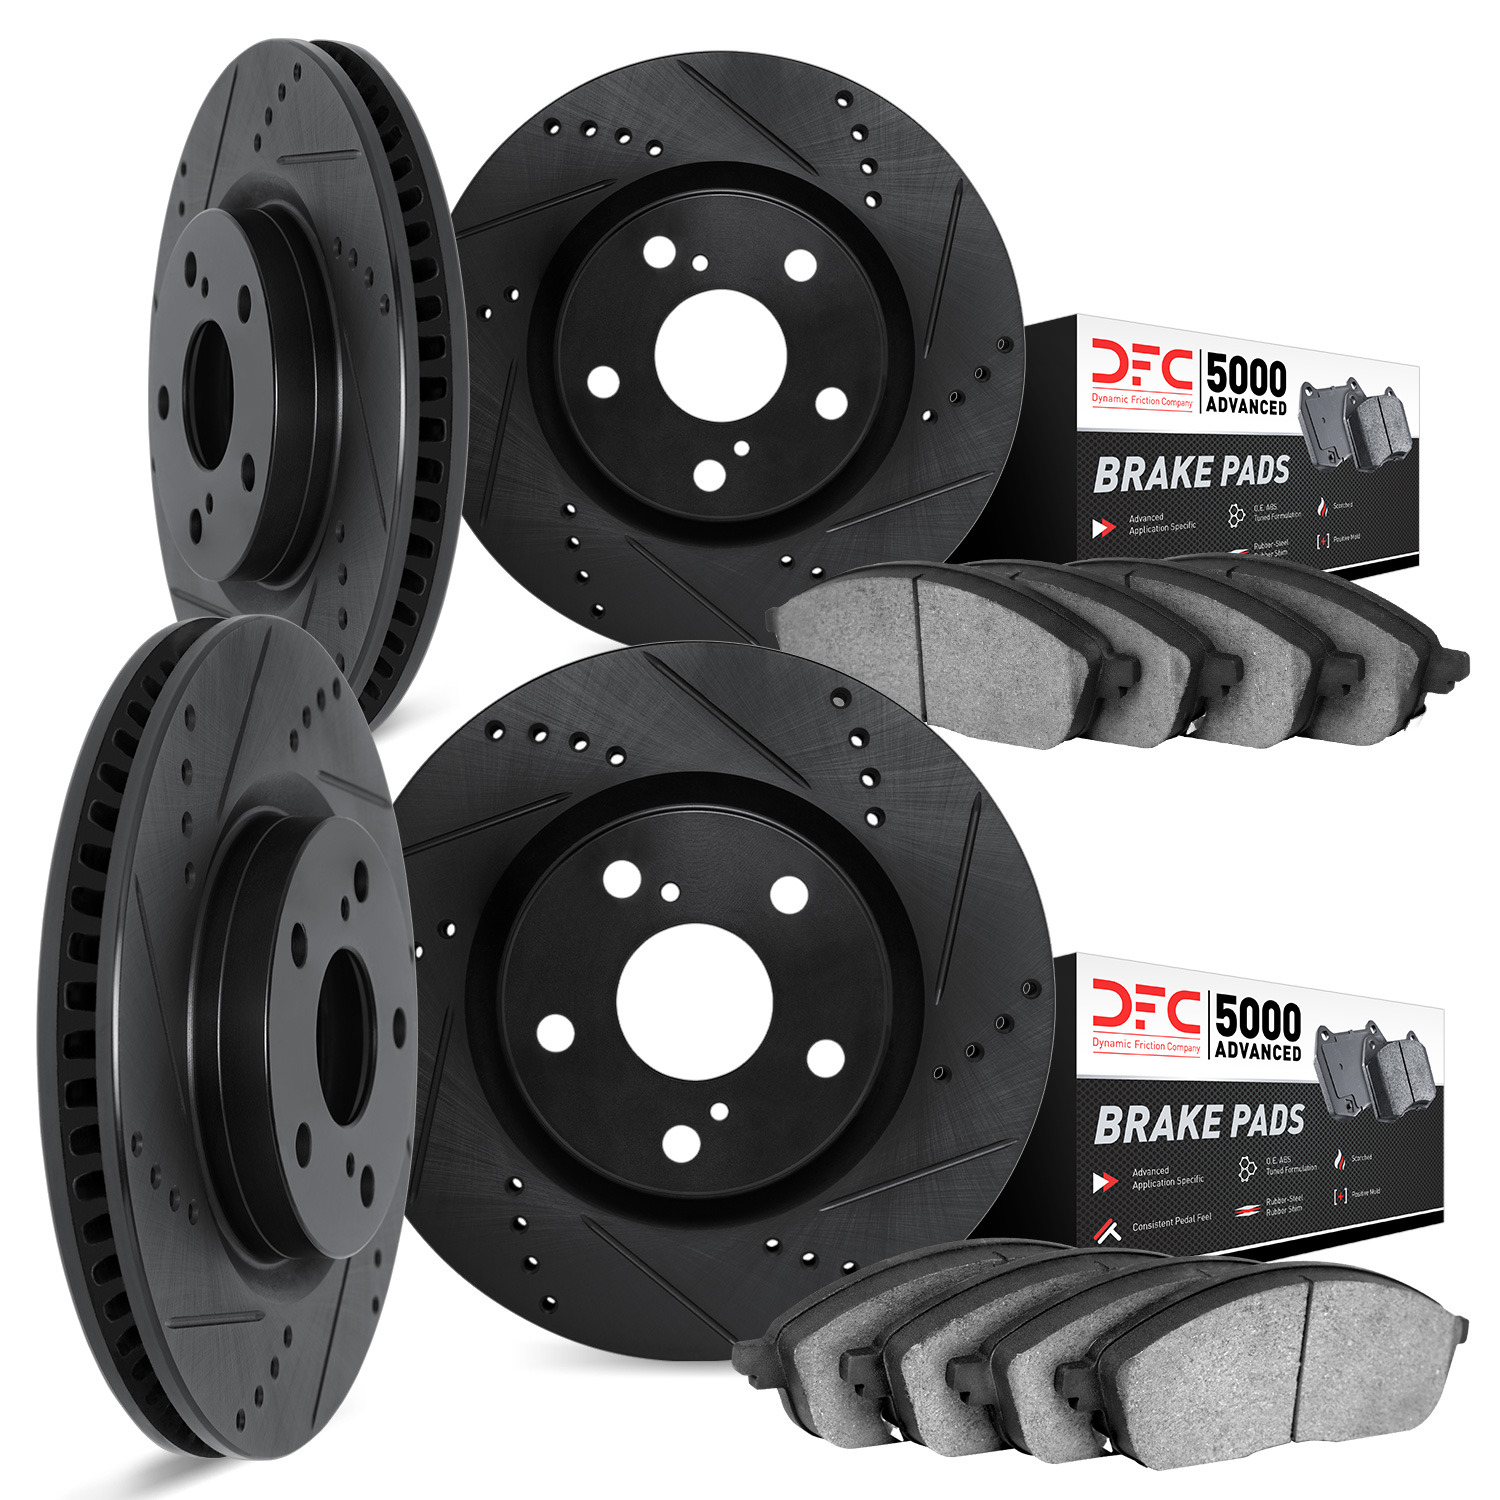 8504-11013 Drilled/Slotted Brake Rotors w/5000 Advanced Brake Pads Kit [Black], 2010-2012 Land Rover, Position: Front and Rear